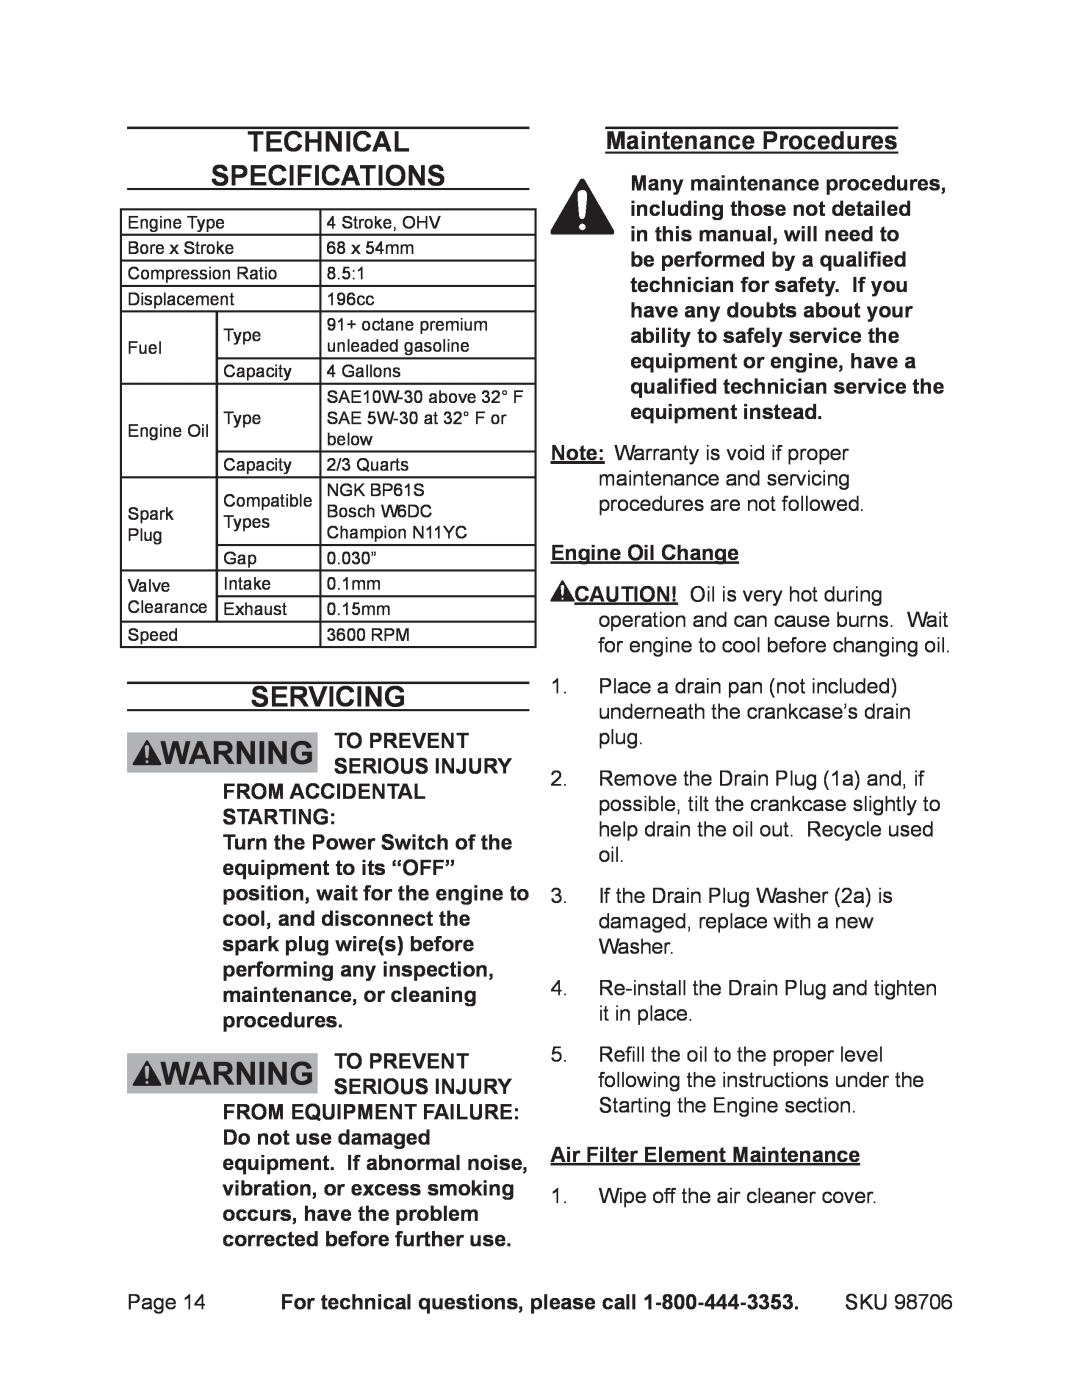 Chicago Electric 98706 manual Technical Specifications, Servicing, To prevent serious injury, from accidental starting 